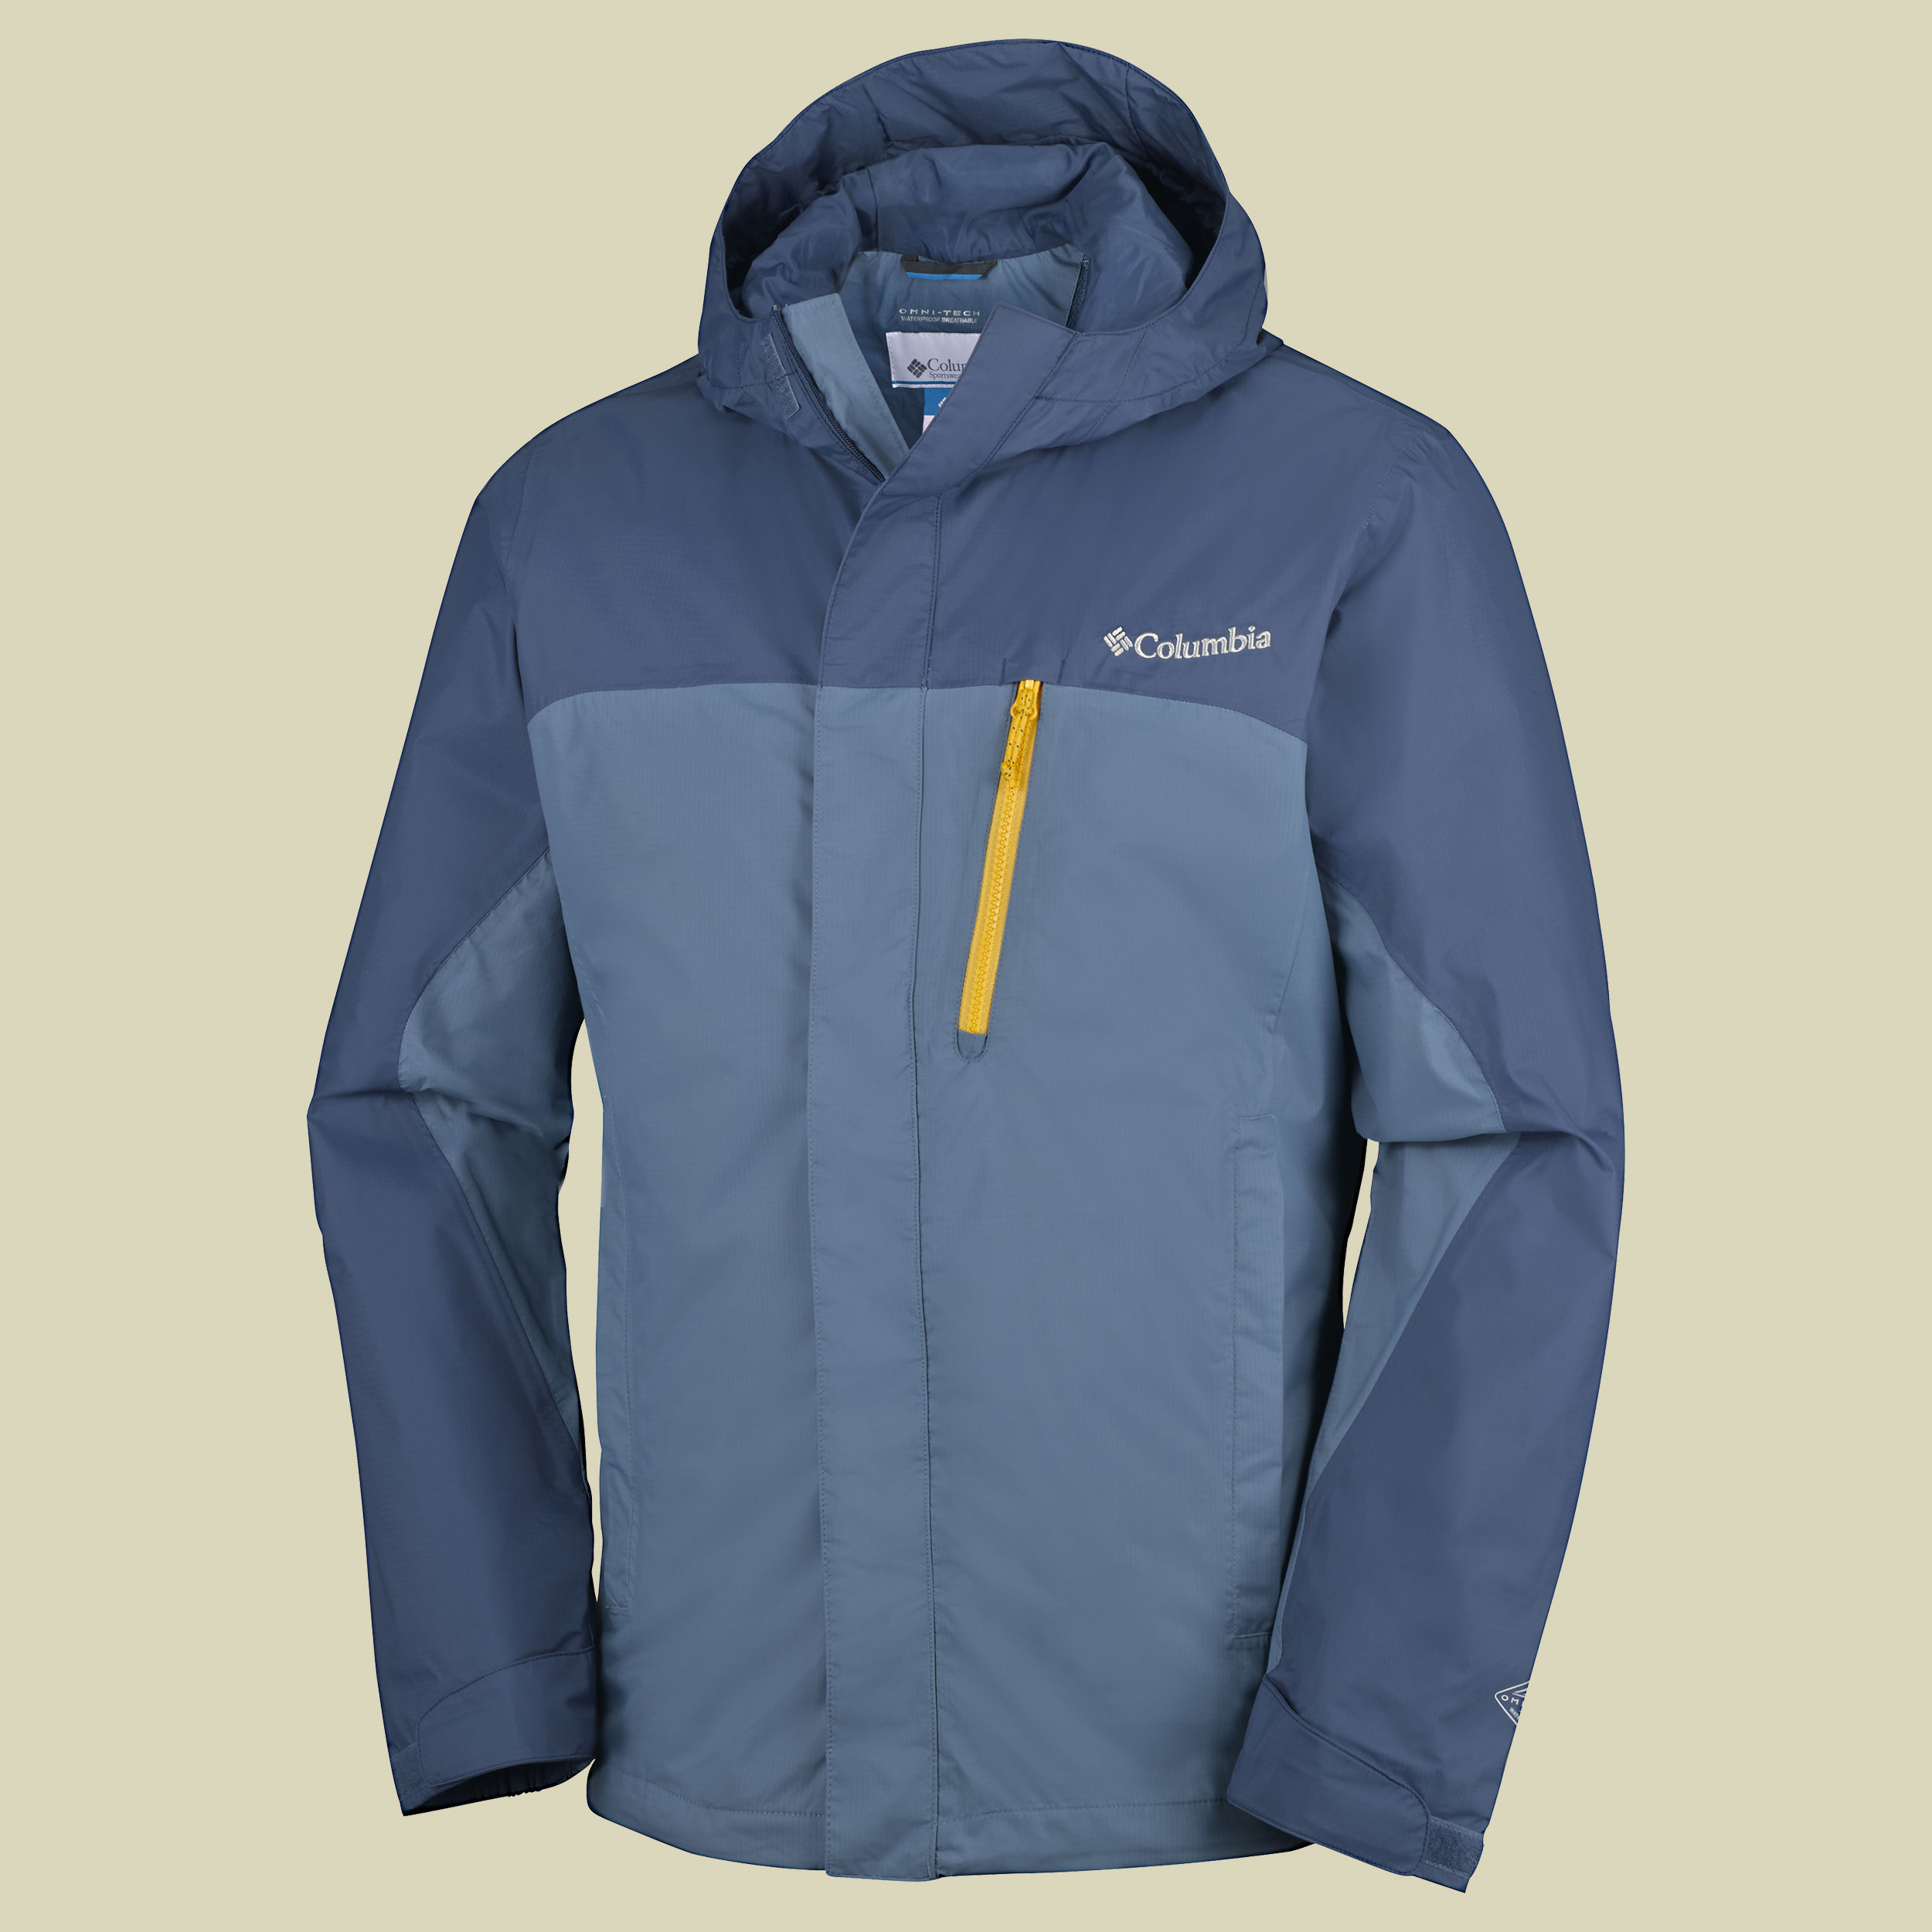 Pouring Adventure Jacket Men Größe S Farbe everblue/night shadow